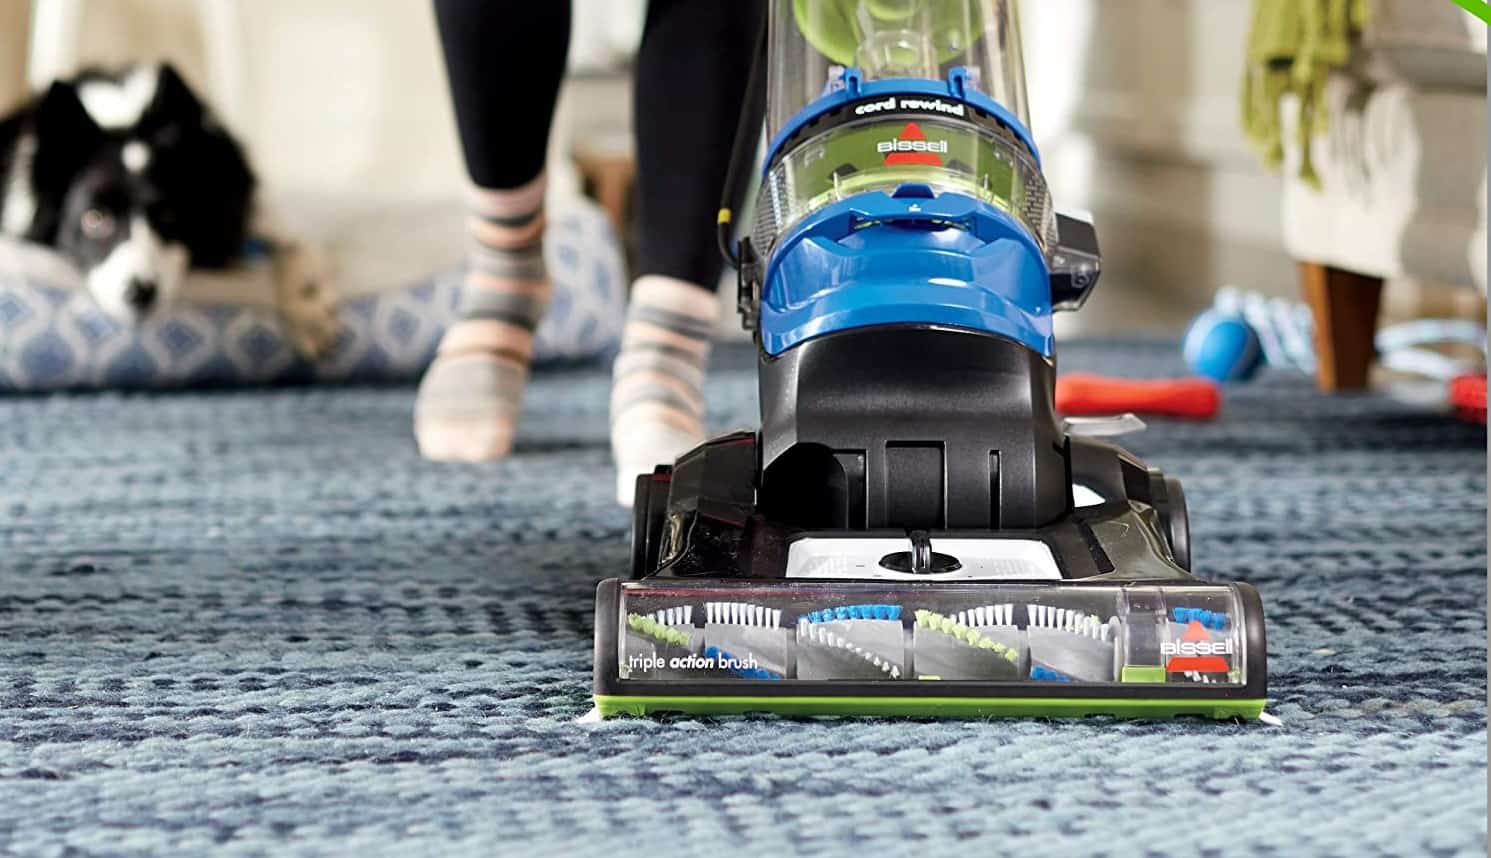 Best Vacuum with Retractable Cord